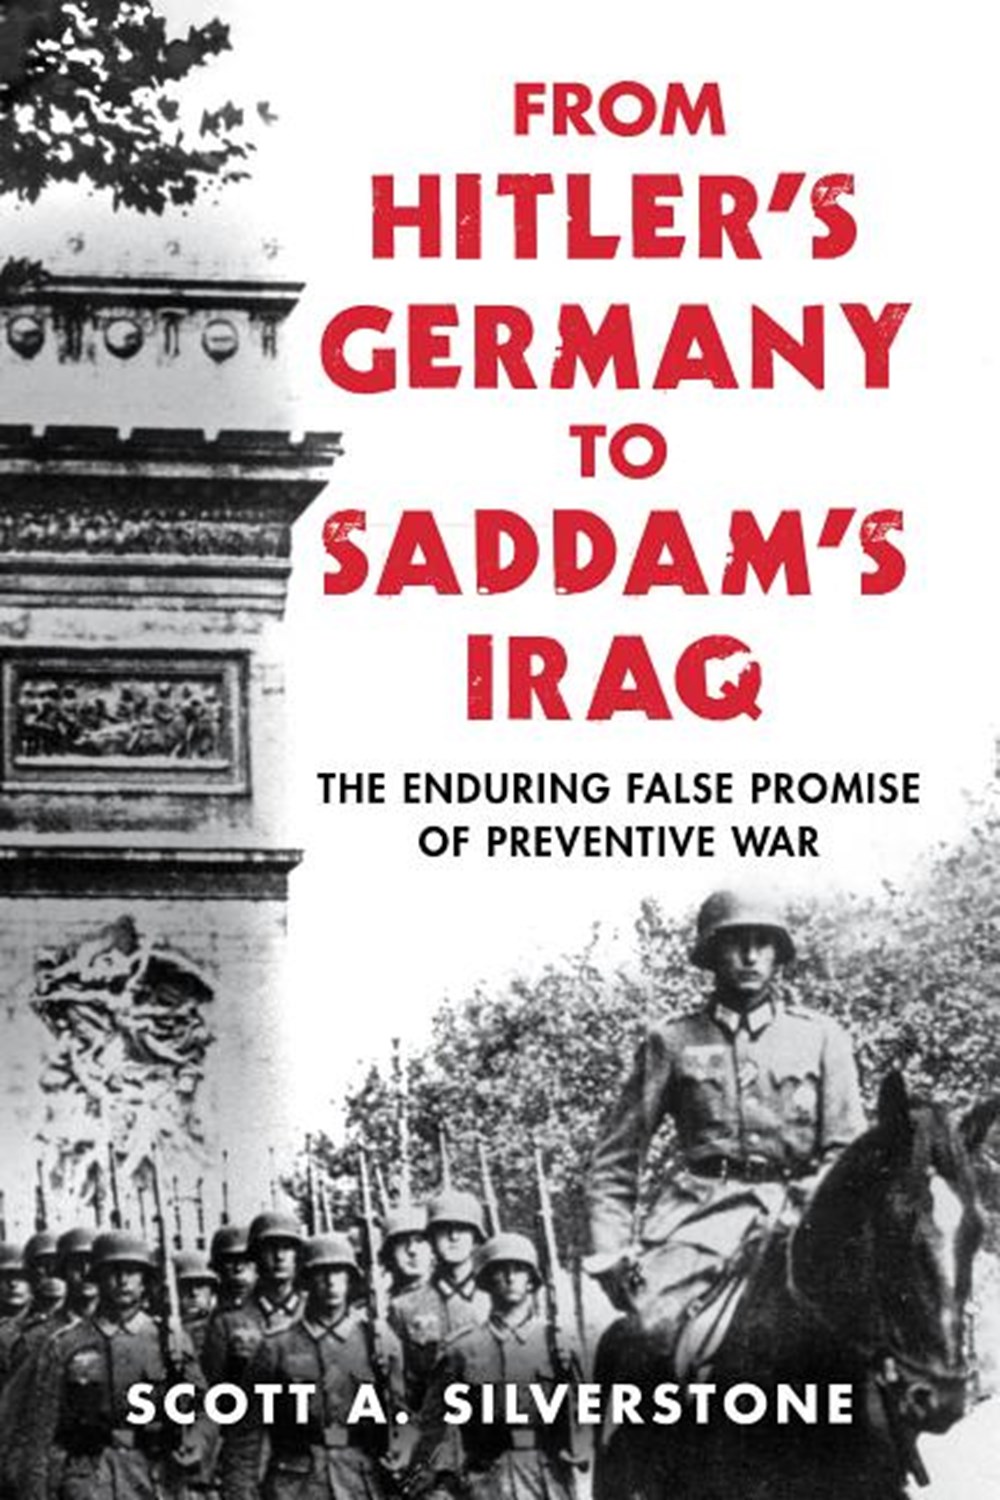 From Hitler's Germany to Saddam's Iraq: The Enduring False Promise of Preventive War